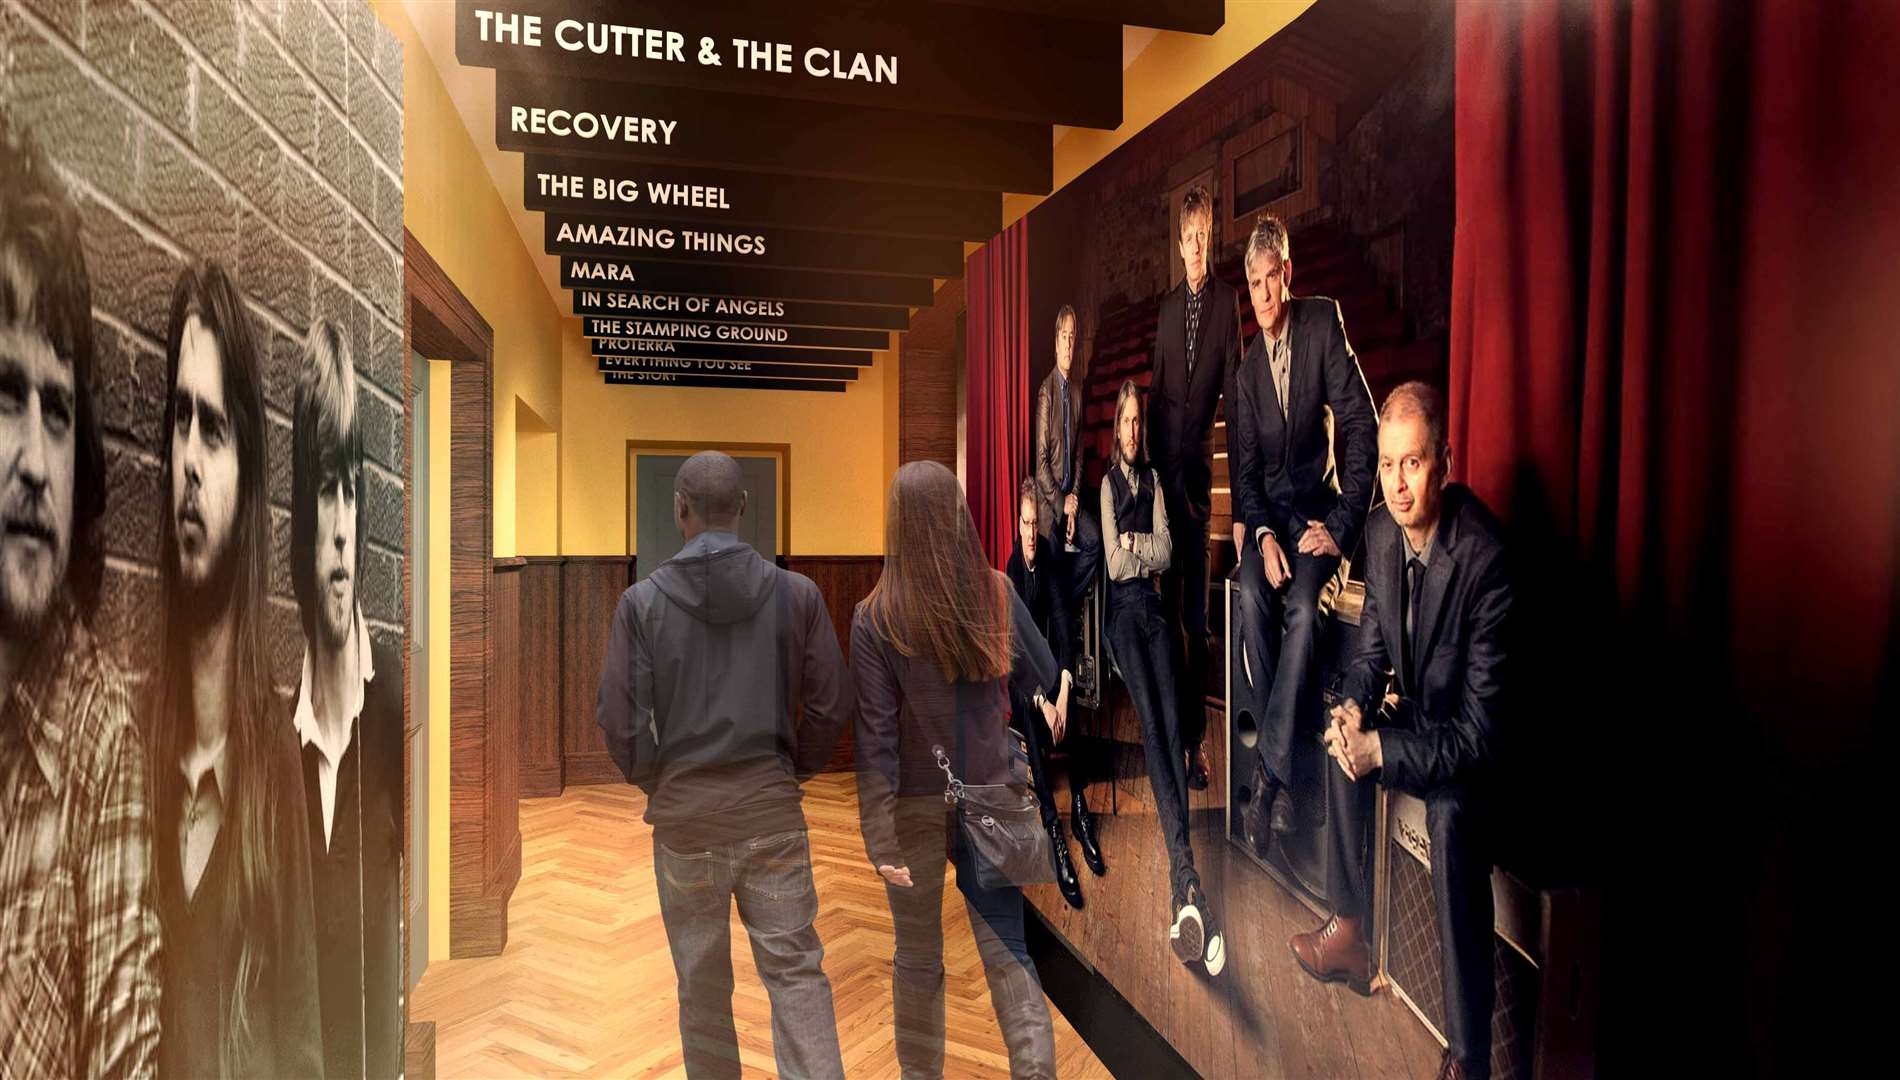 An artist's impression of the Runrig exhibition in the Cèilidh Rooms at the Inverness Castle Experience.